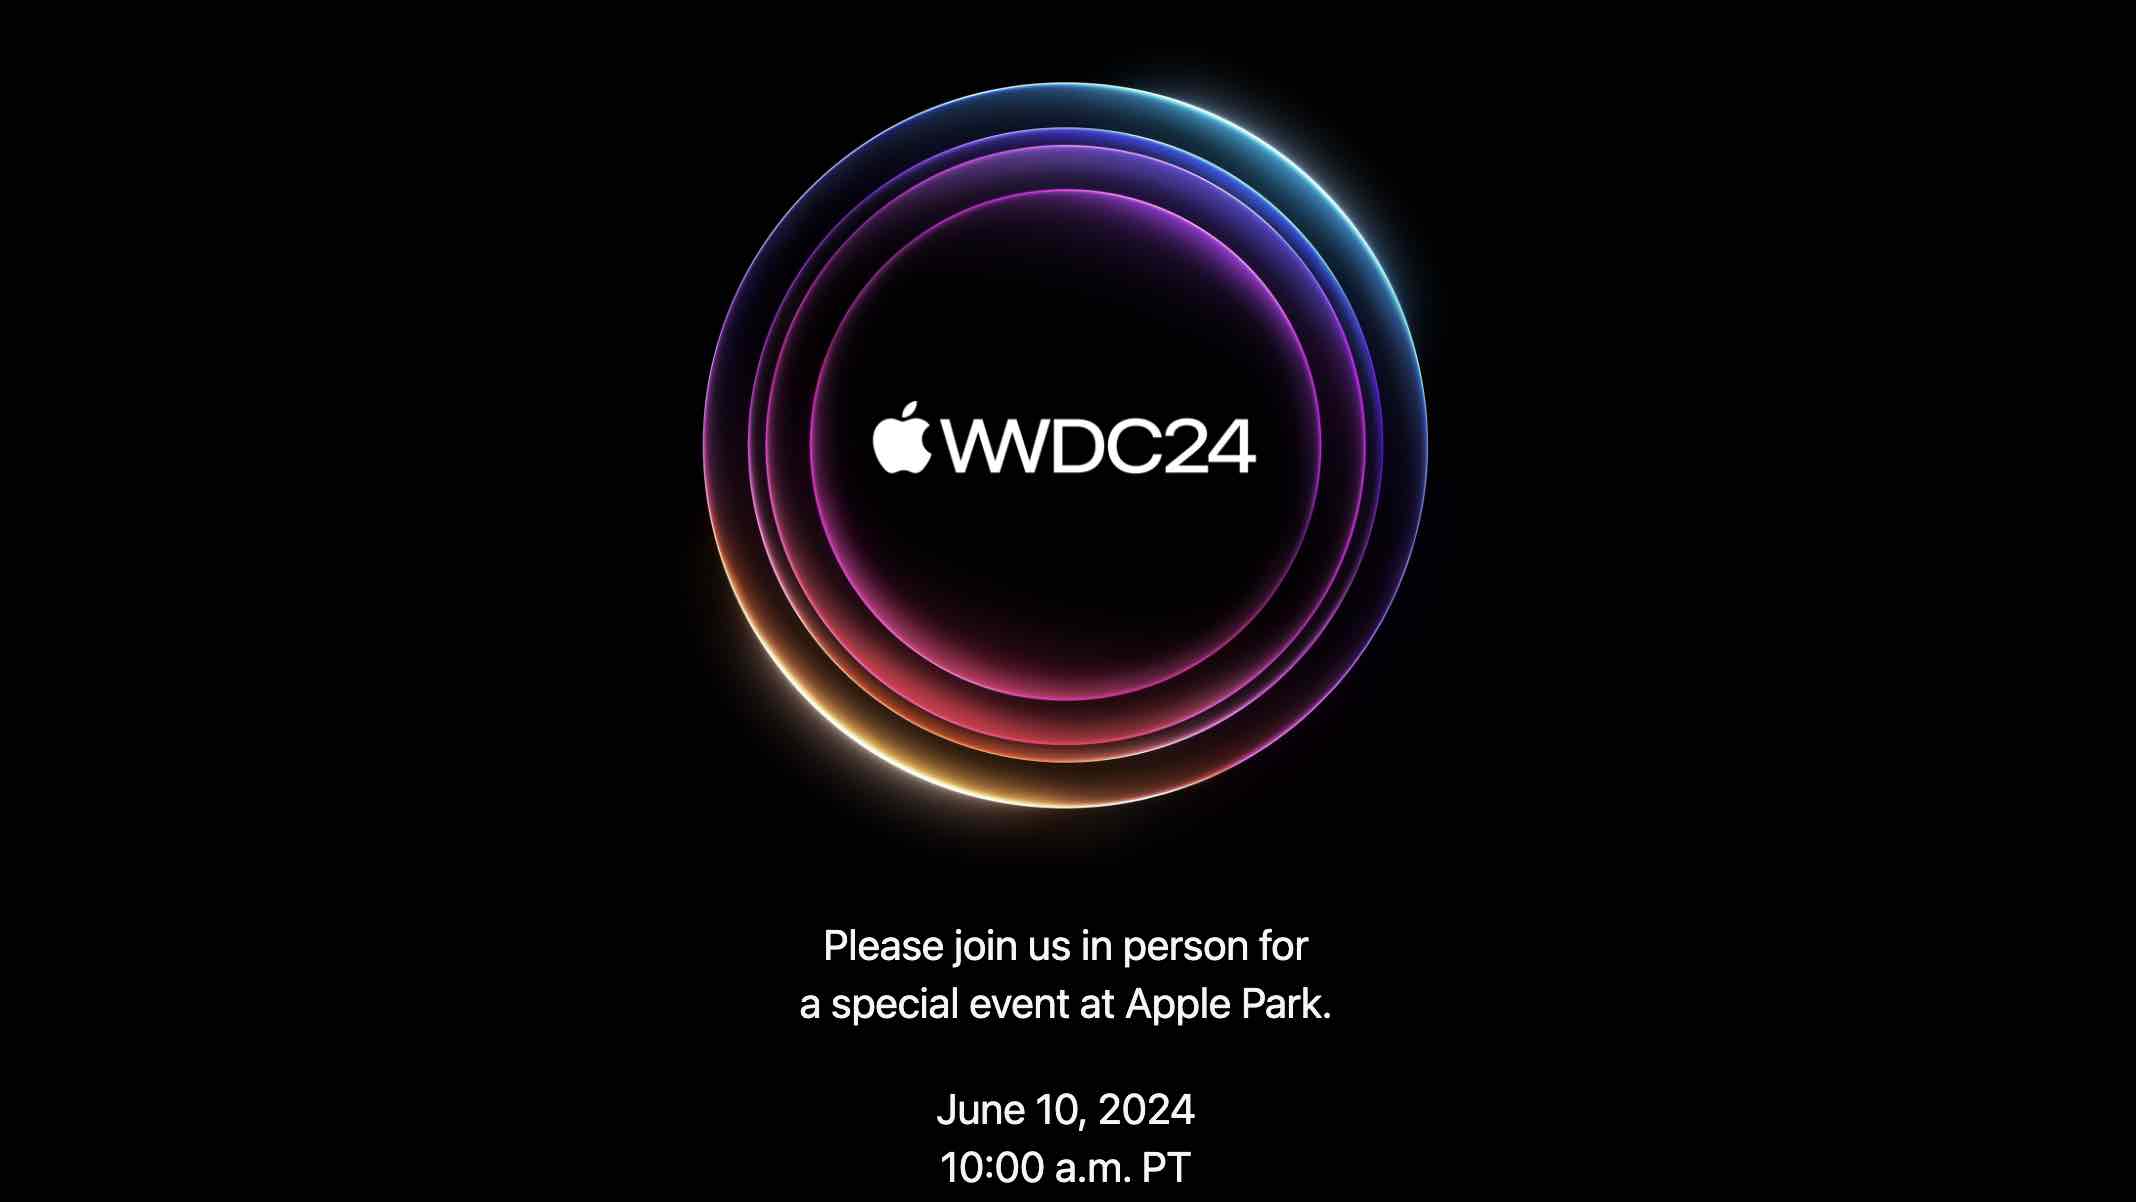 Apple will stream the event live.